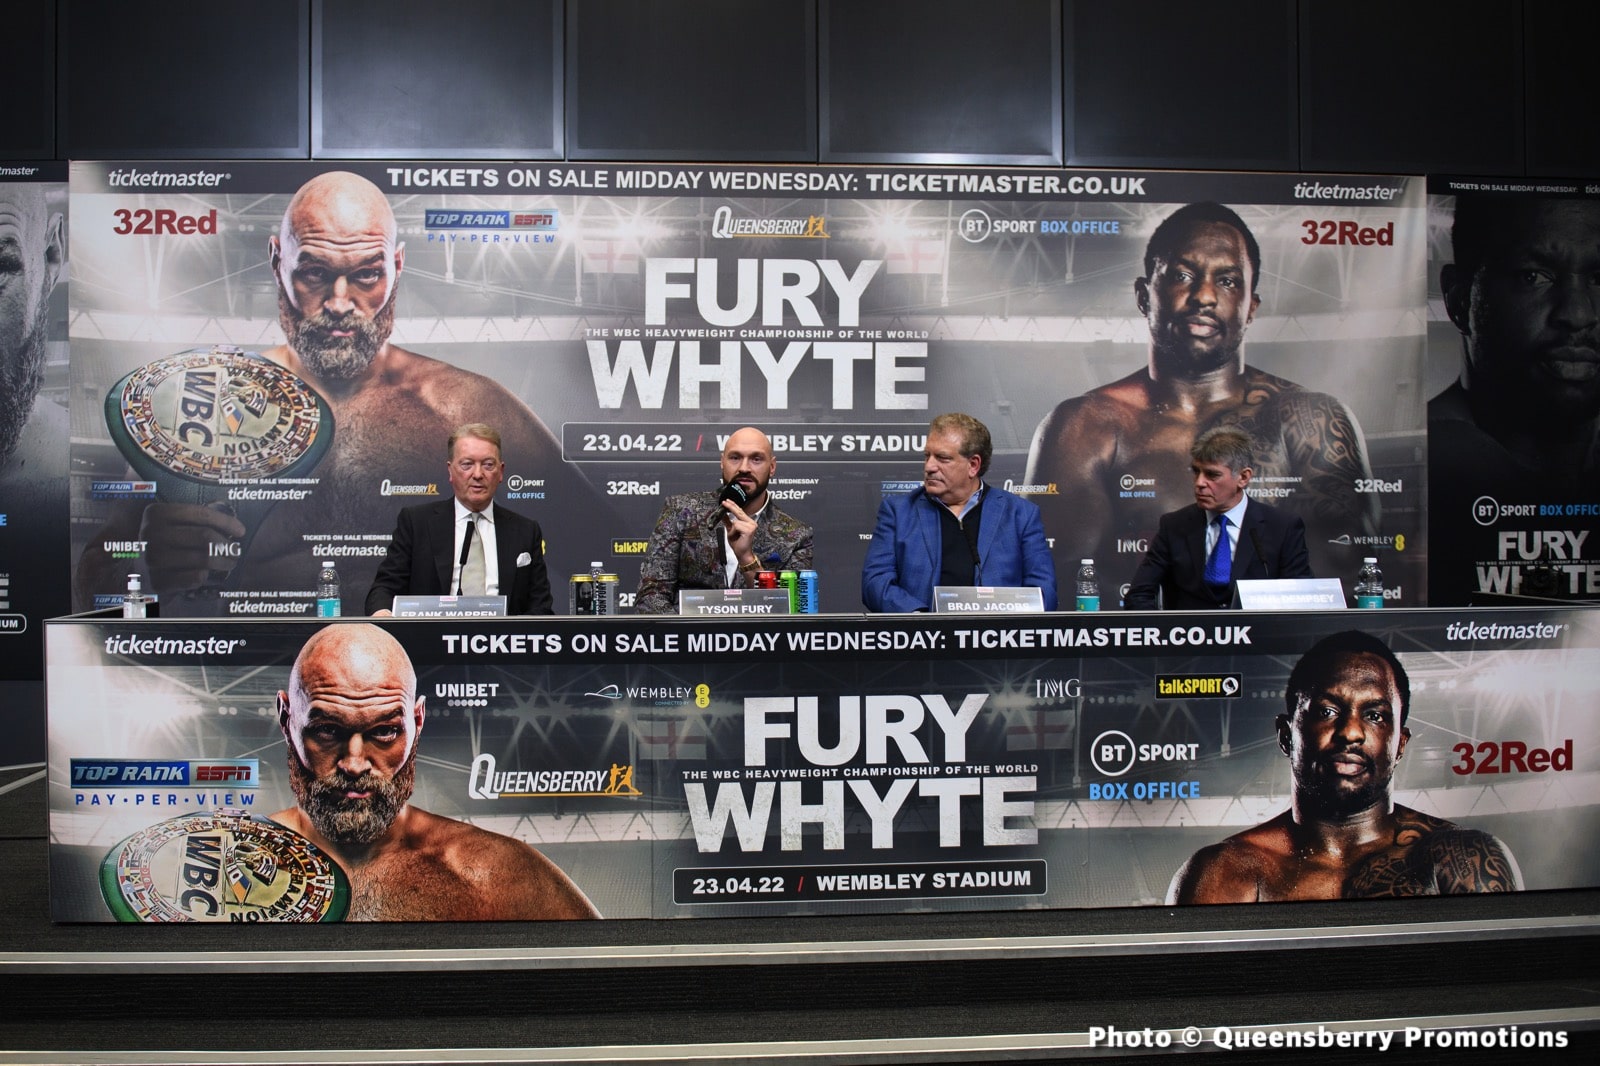 Image: Tyson Fury vs. Dillian Whyte sells 85K tickets on first day for Wembley stadium